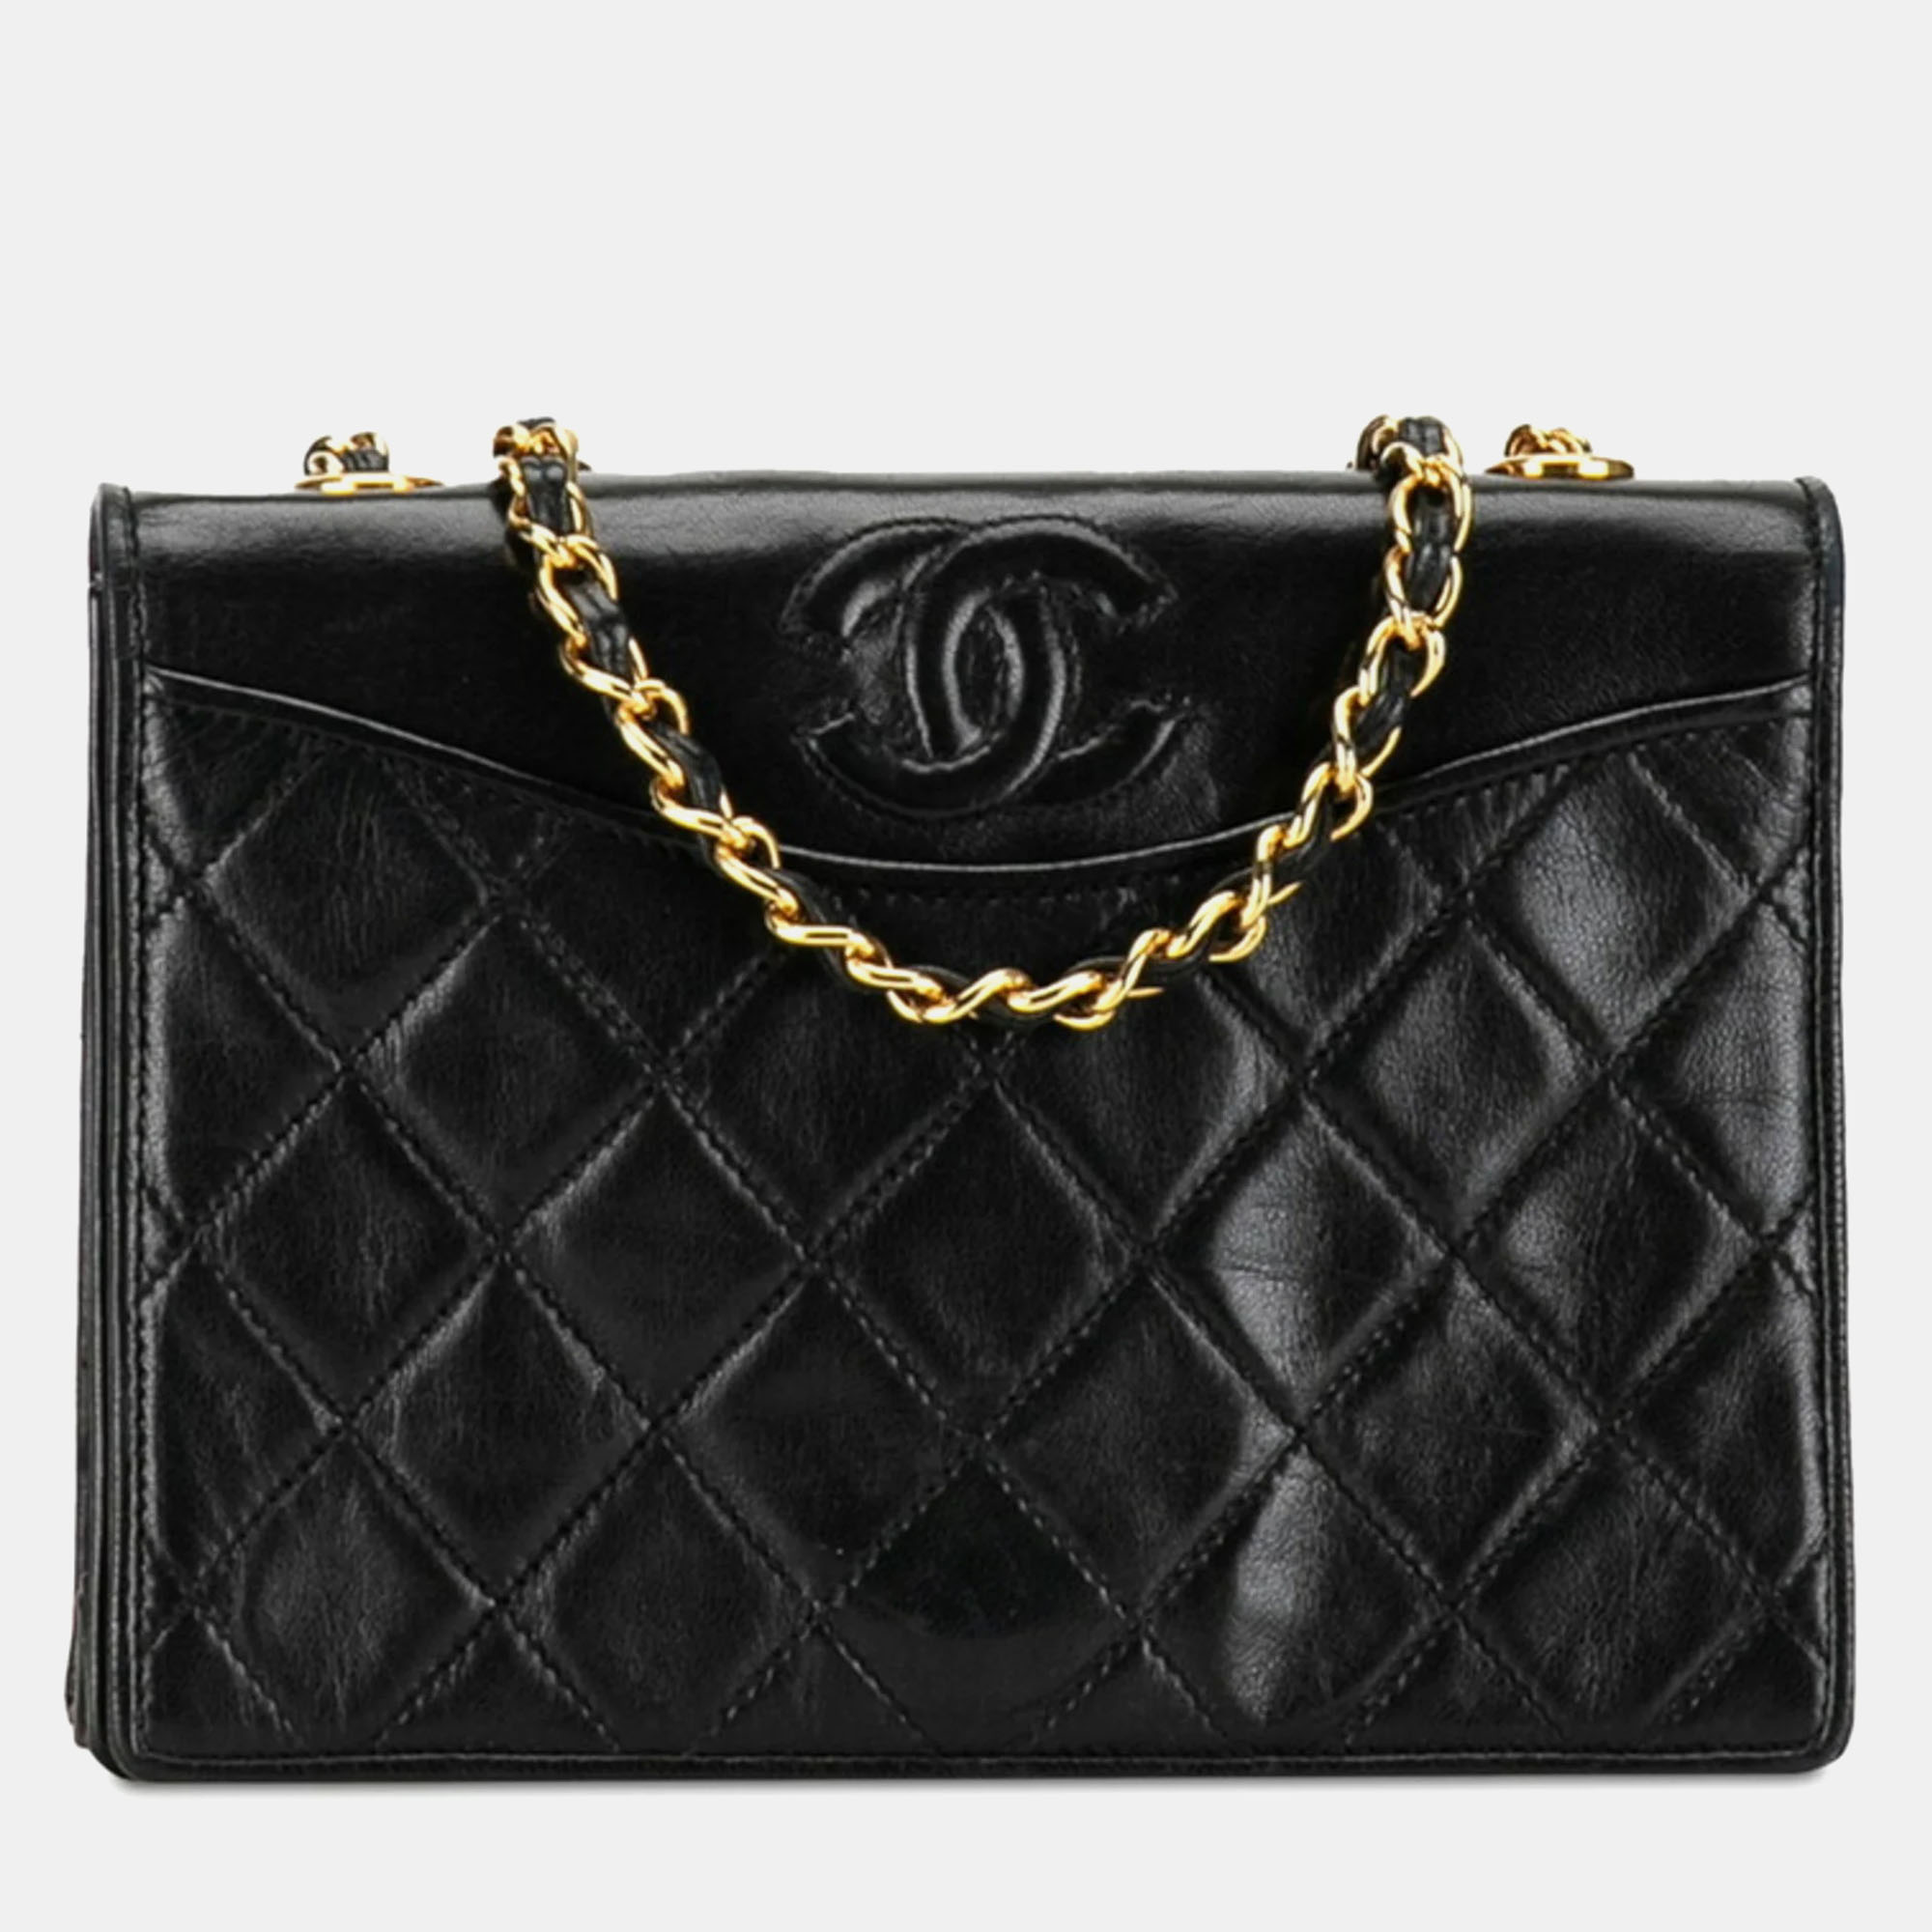 

Chanel Black Leather CC Quilted Flap Bag